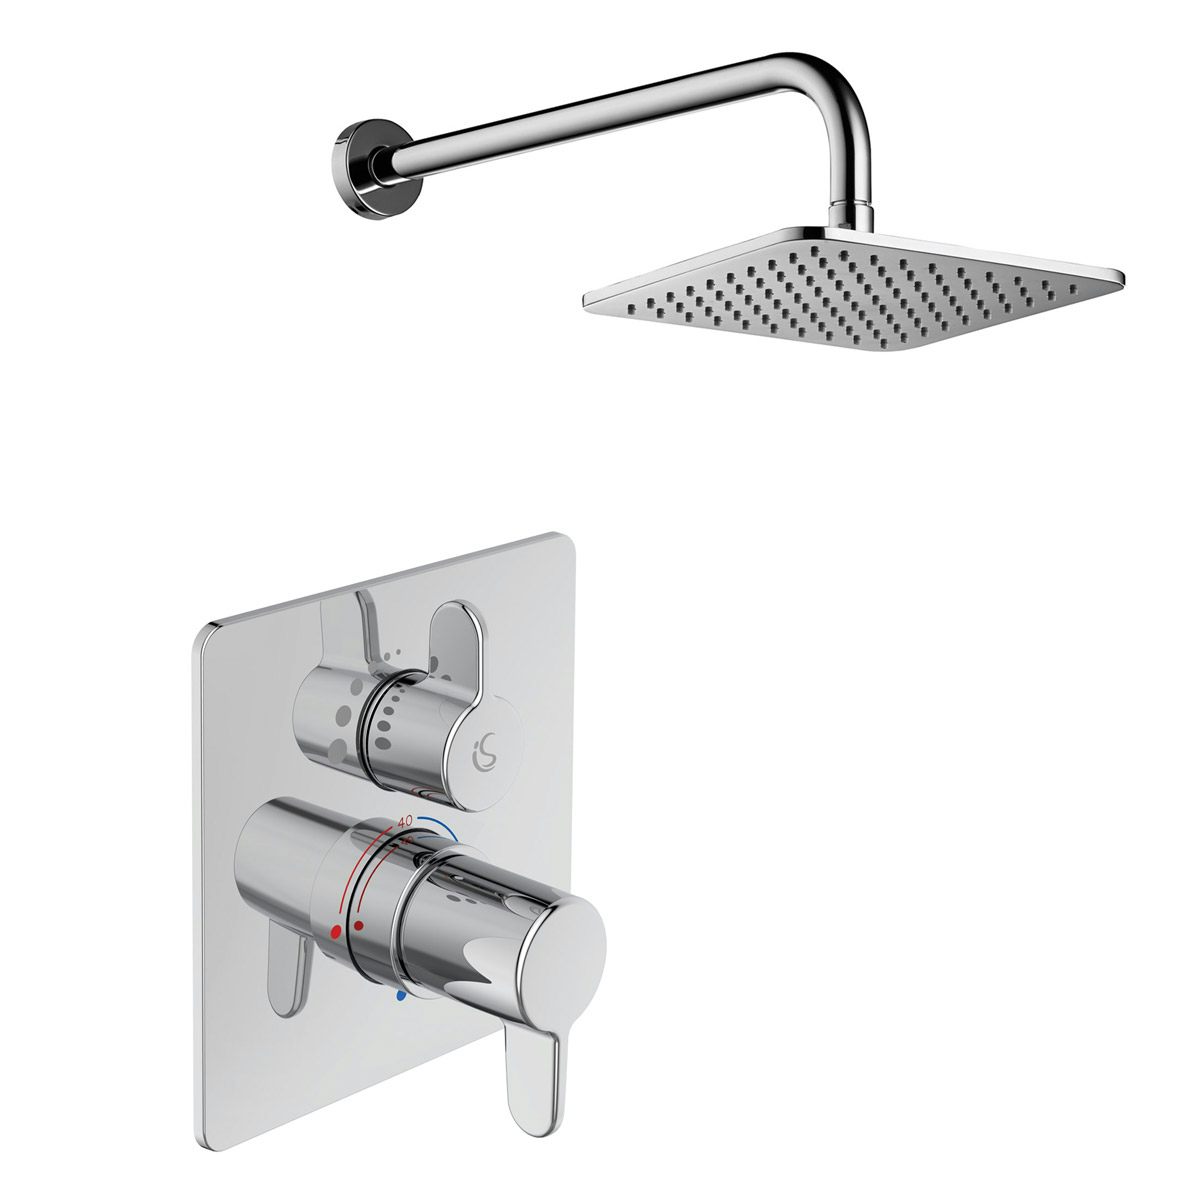 Ideal Standard Concept Freedom square concealed thermostatic mixer shower with ceiling arm